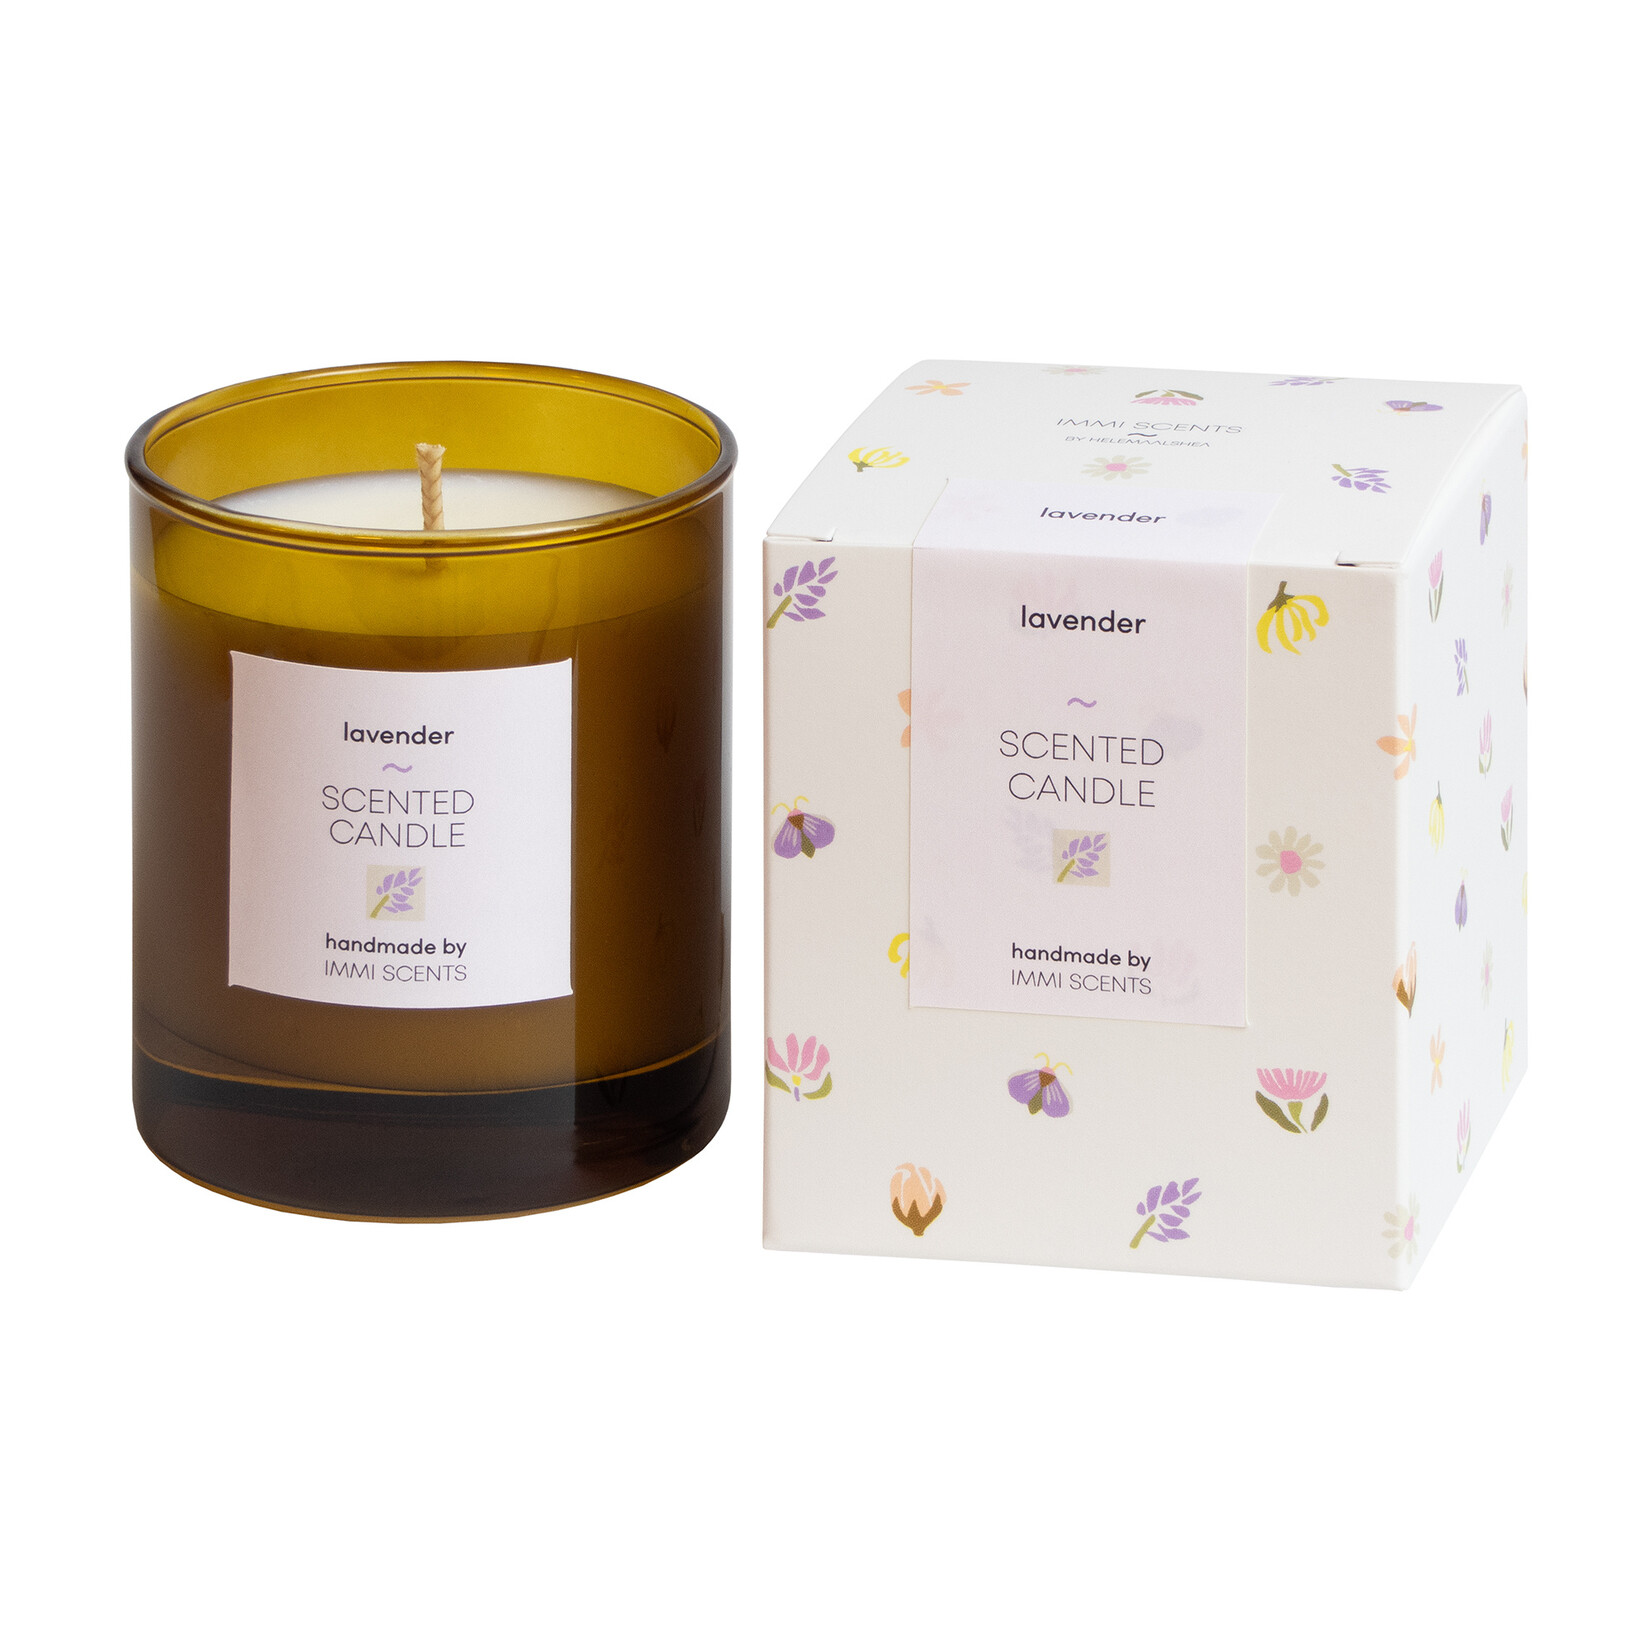 Scented candle - Lavender - amber